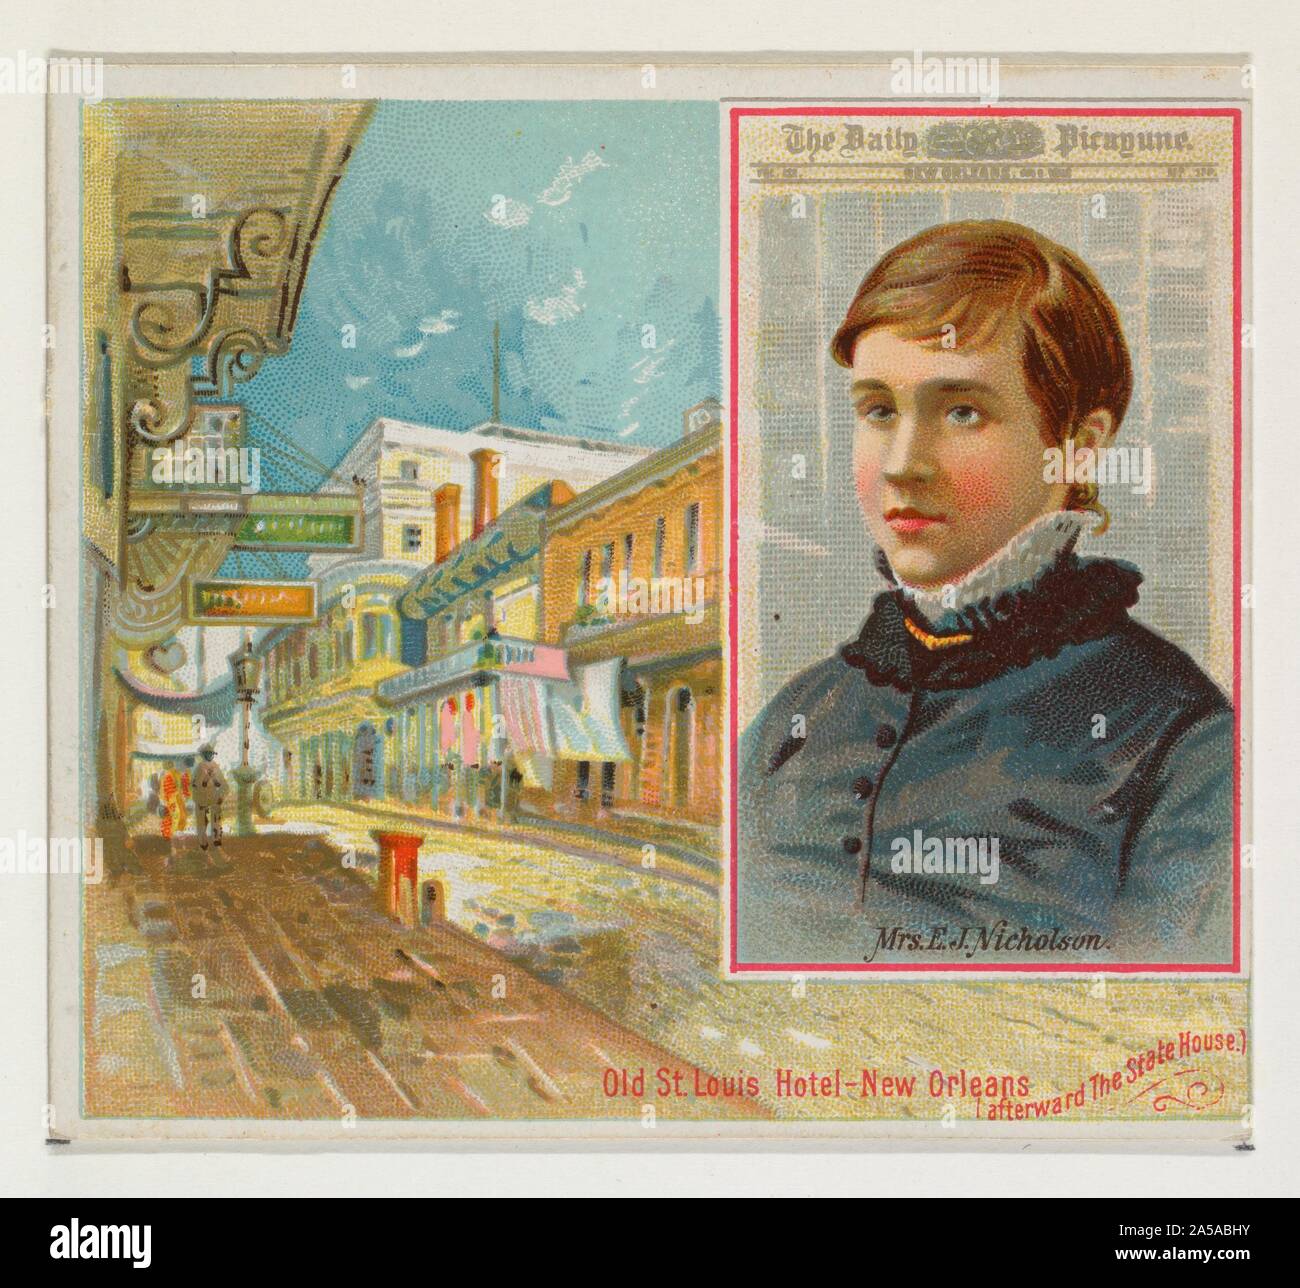 Mrs. E. J. Nicholson, The New Orleans Daily Picayune, from the American Editors series (N35) for Allen & Ginter Ciga.jpg - 2A5ABHY Stock Photo